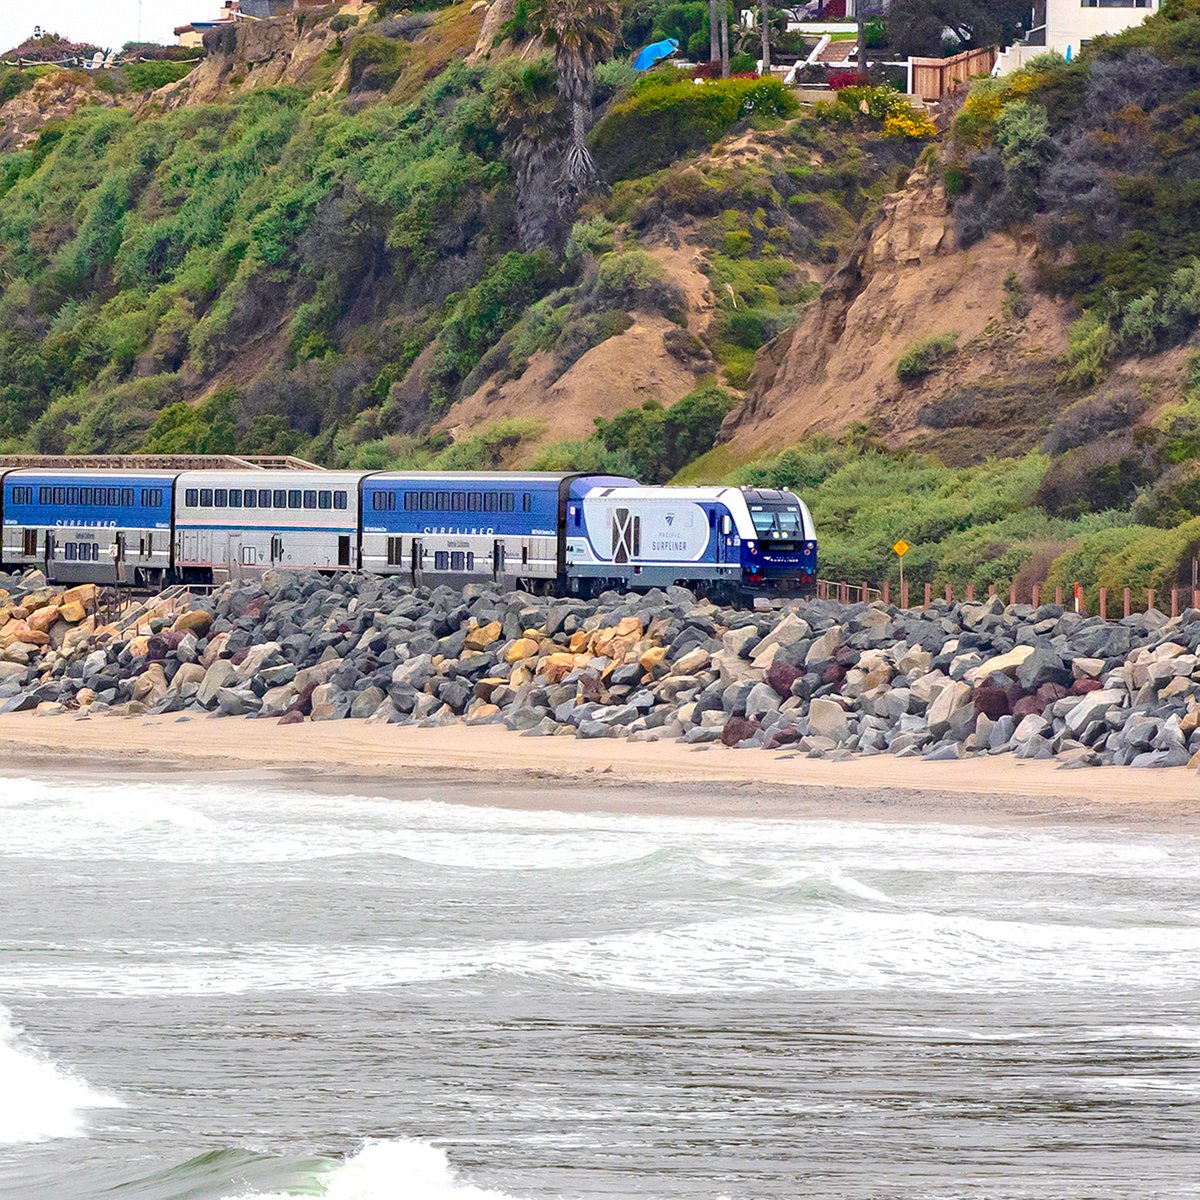 Full passenger rail service will return through #SanClemente beginning Mon., March 25! Metrolink trains will once again operate to #Oceanside & Pacific Surfliner trains will operate without bus connections to #SanDiego. Details: octa.net/RailUpdates